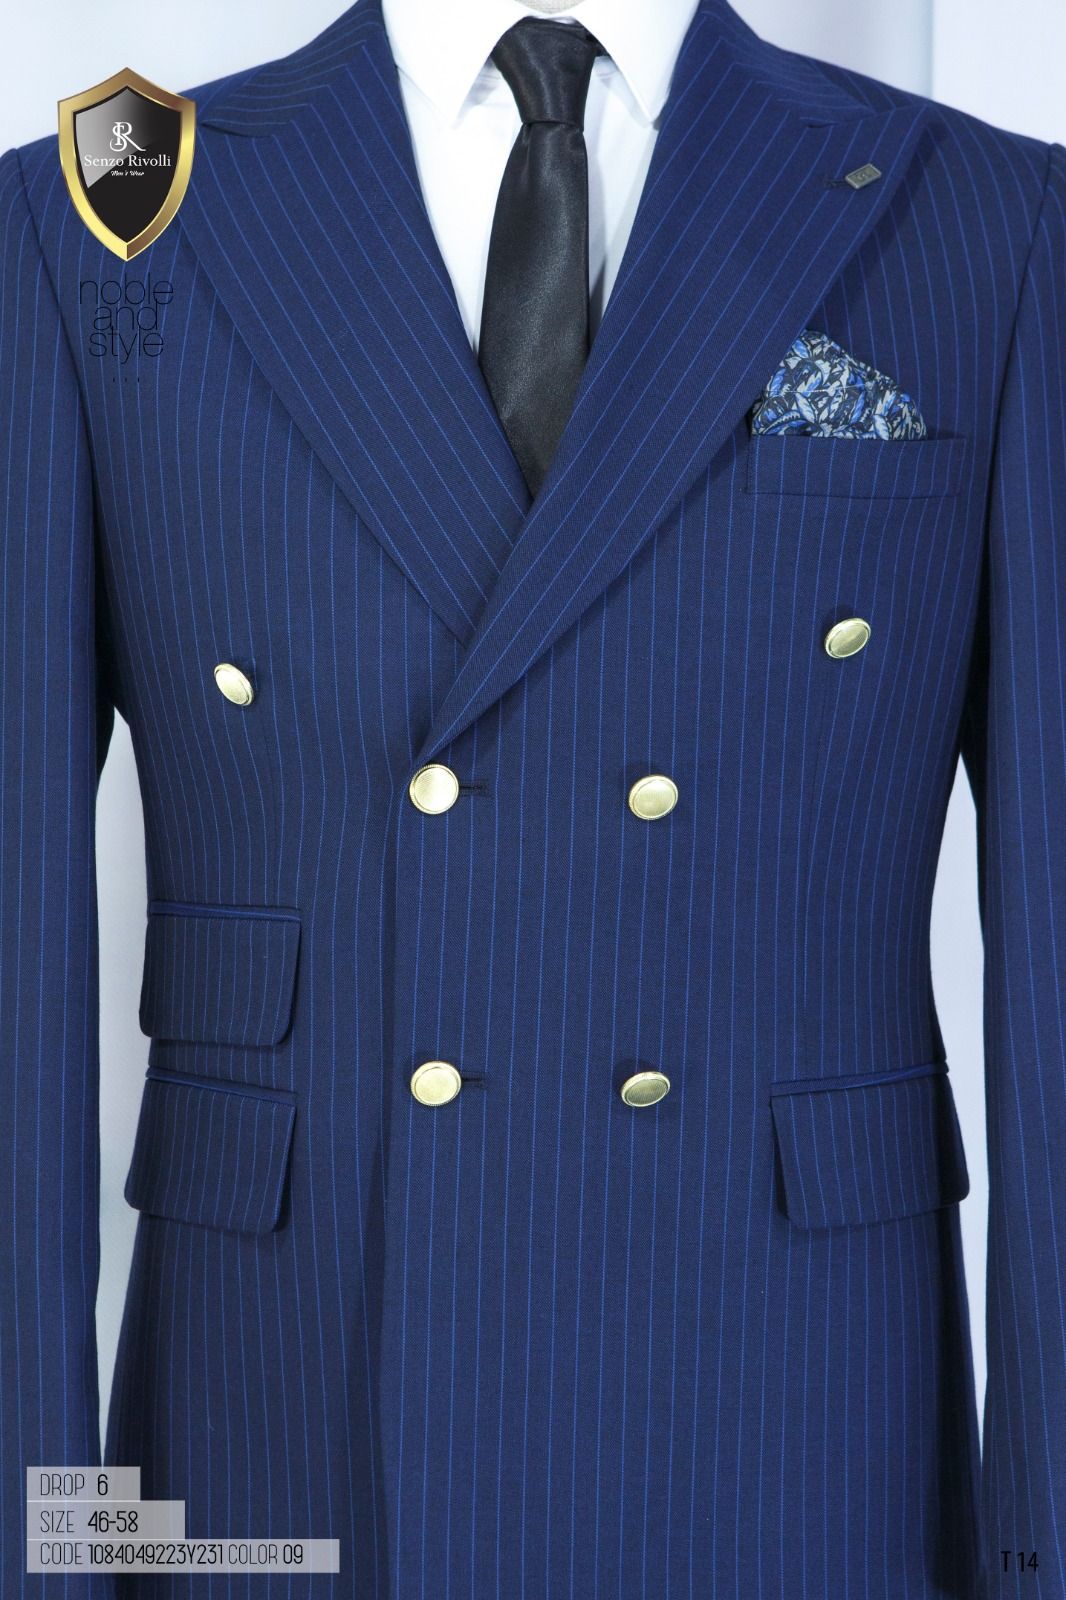 EXECUTIVE NAVY BLUE AND BLUE STRIPPED TURKEY SUIT WITH GOLDEN BUTTON-deluxe.com.ng